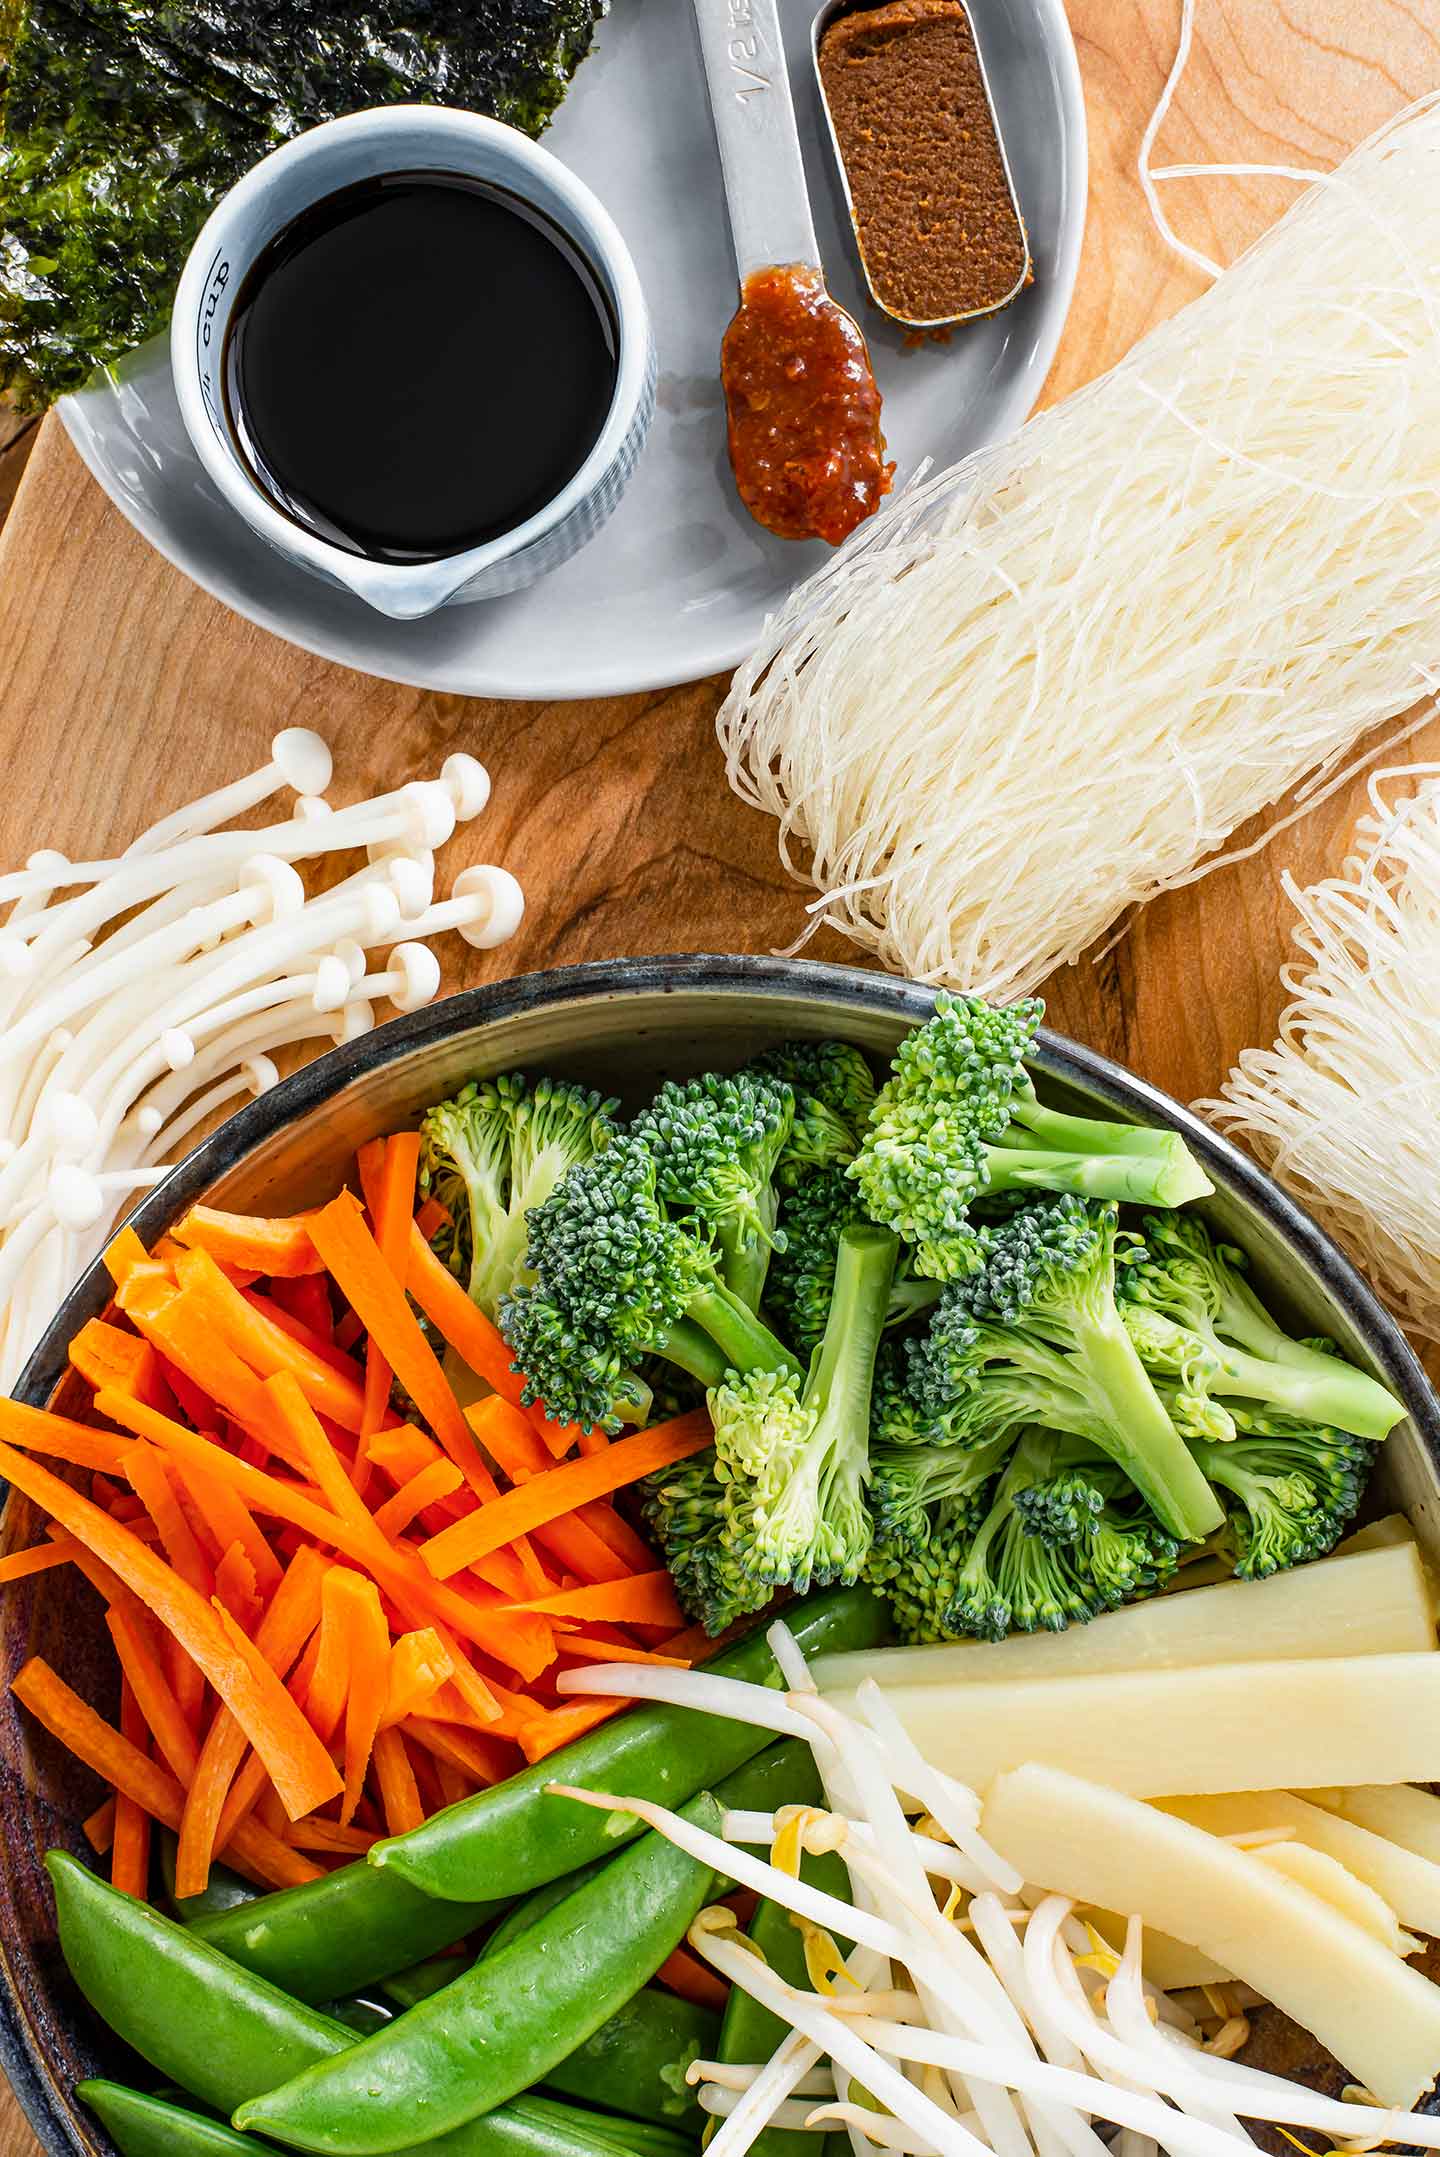 Top down view of ingredients. Tamari, miso paste, and chili garlic sauce are pictured amoung dry rice noodles, enoki mushrooms, carrots, broccoli, snap peas, bamboo shoots, and bean sprouts.